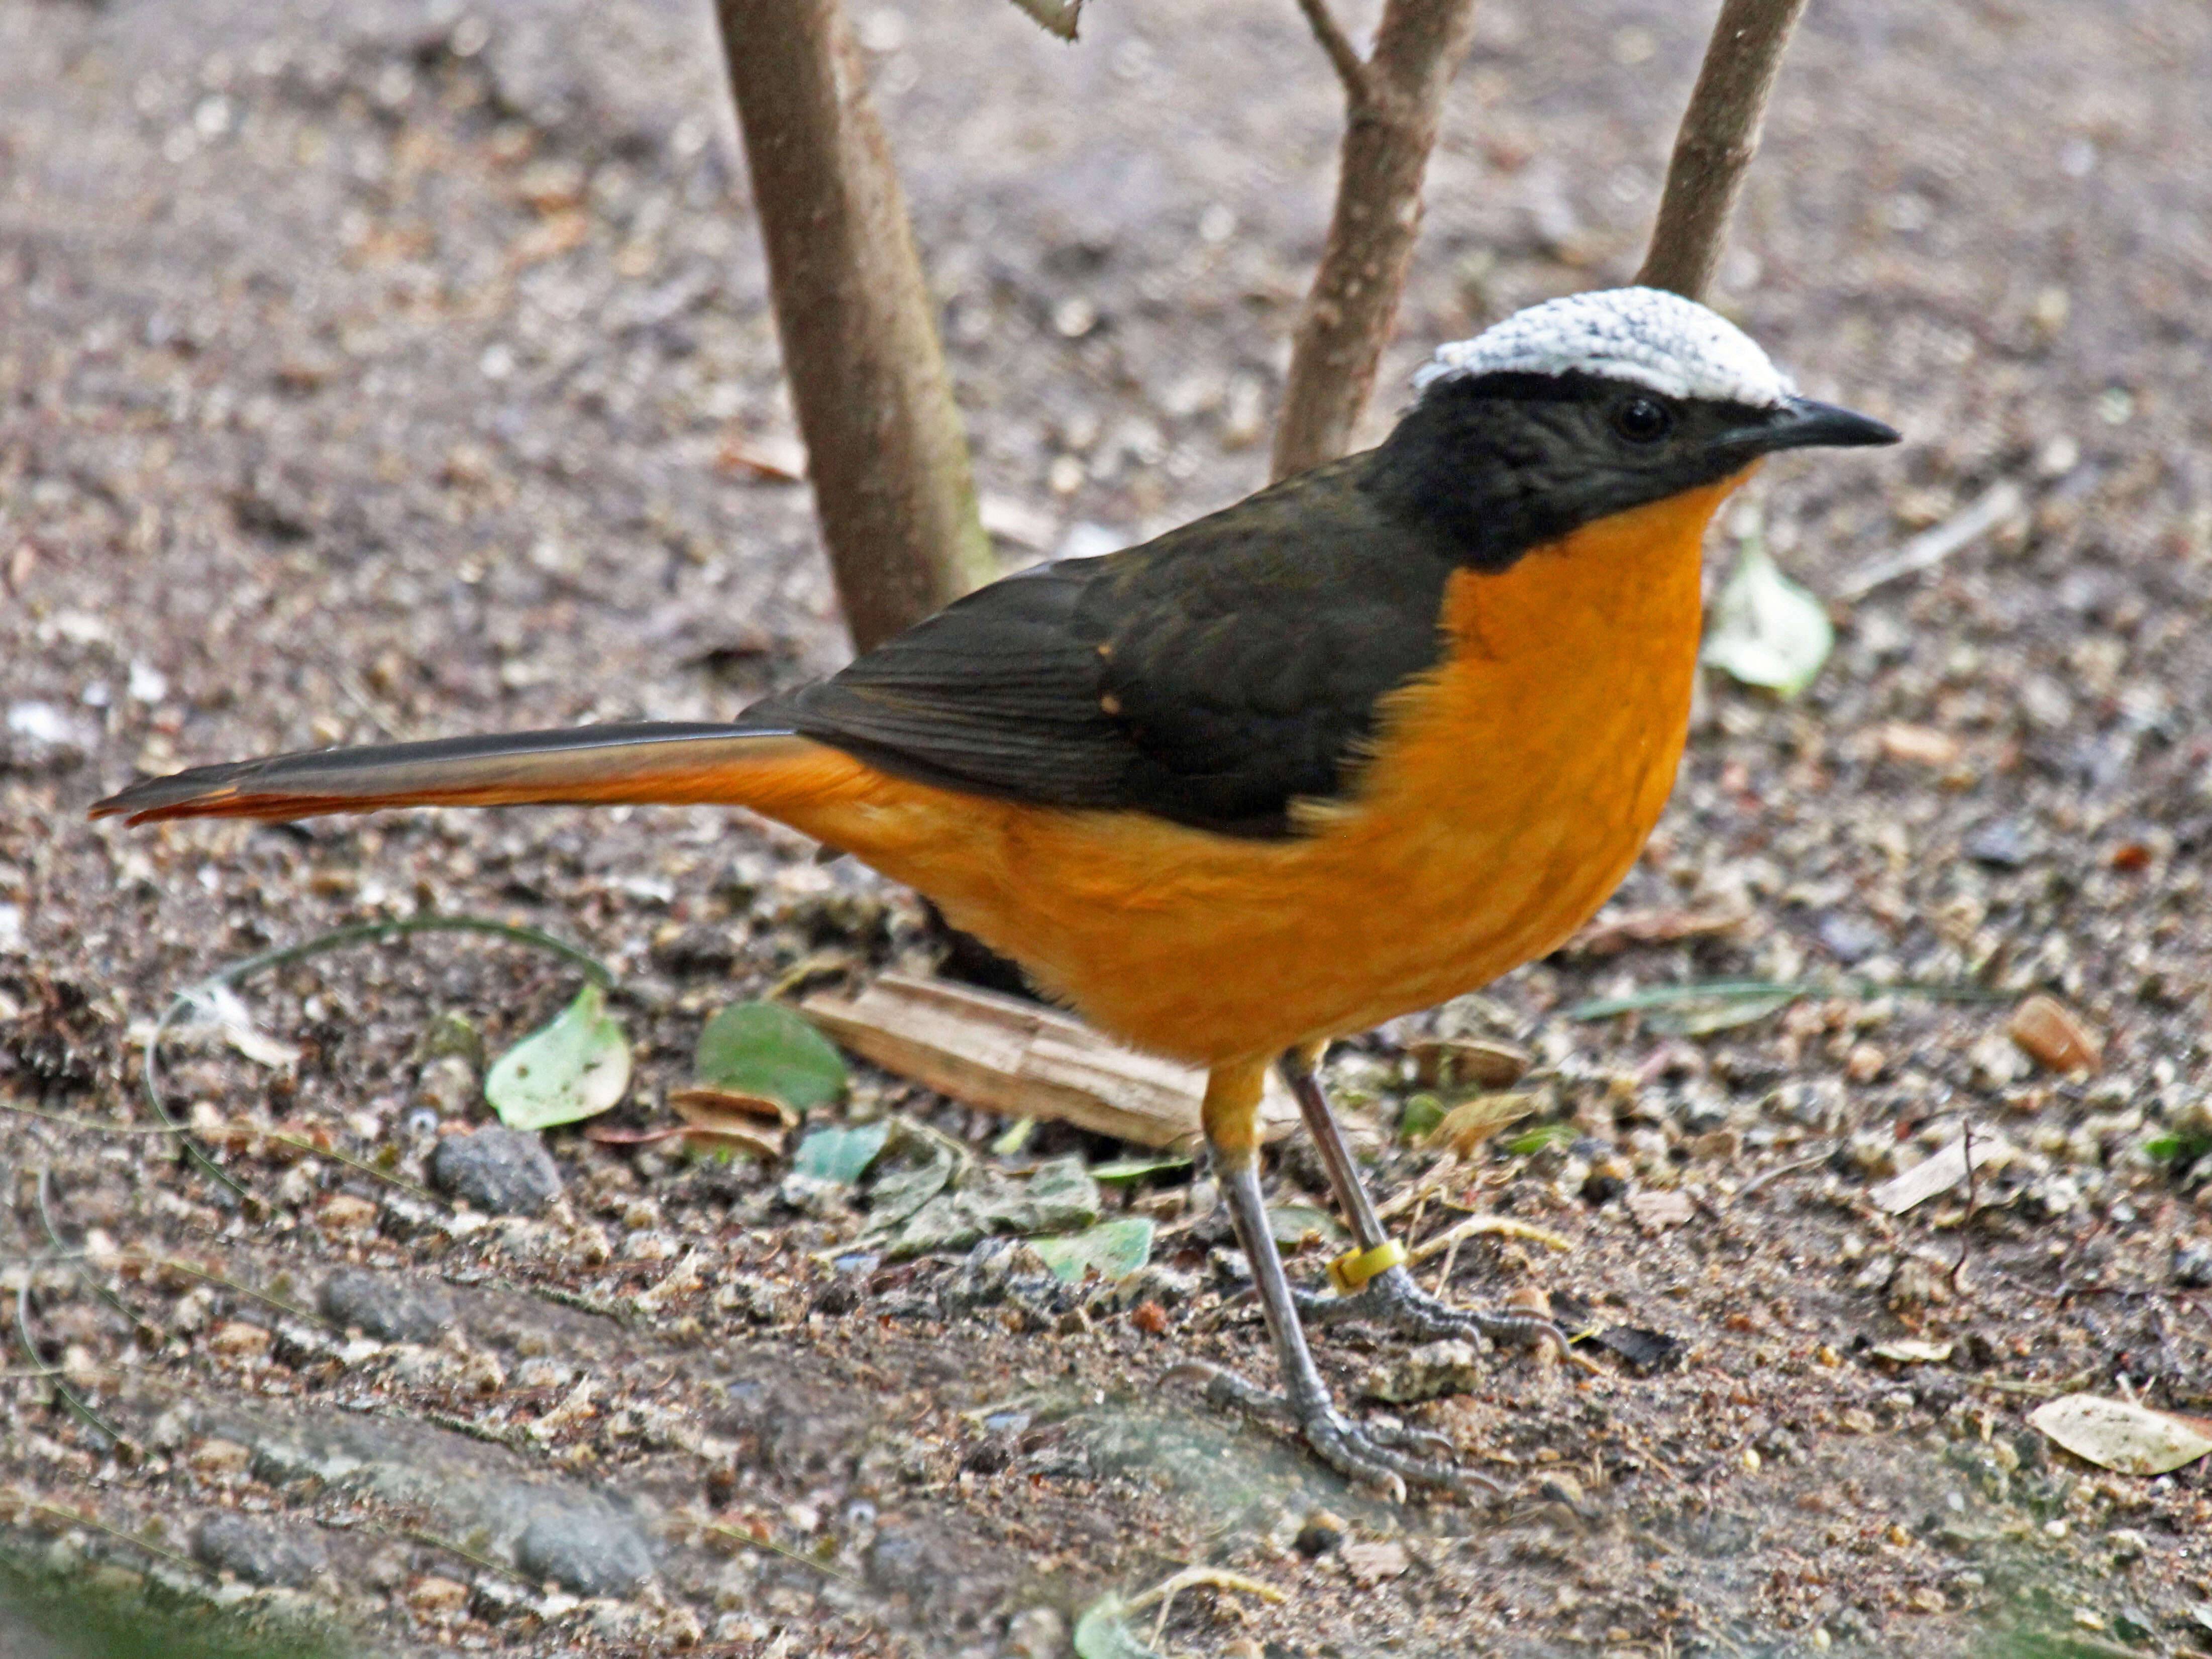 Image of White-crowned Robin-Chat